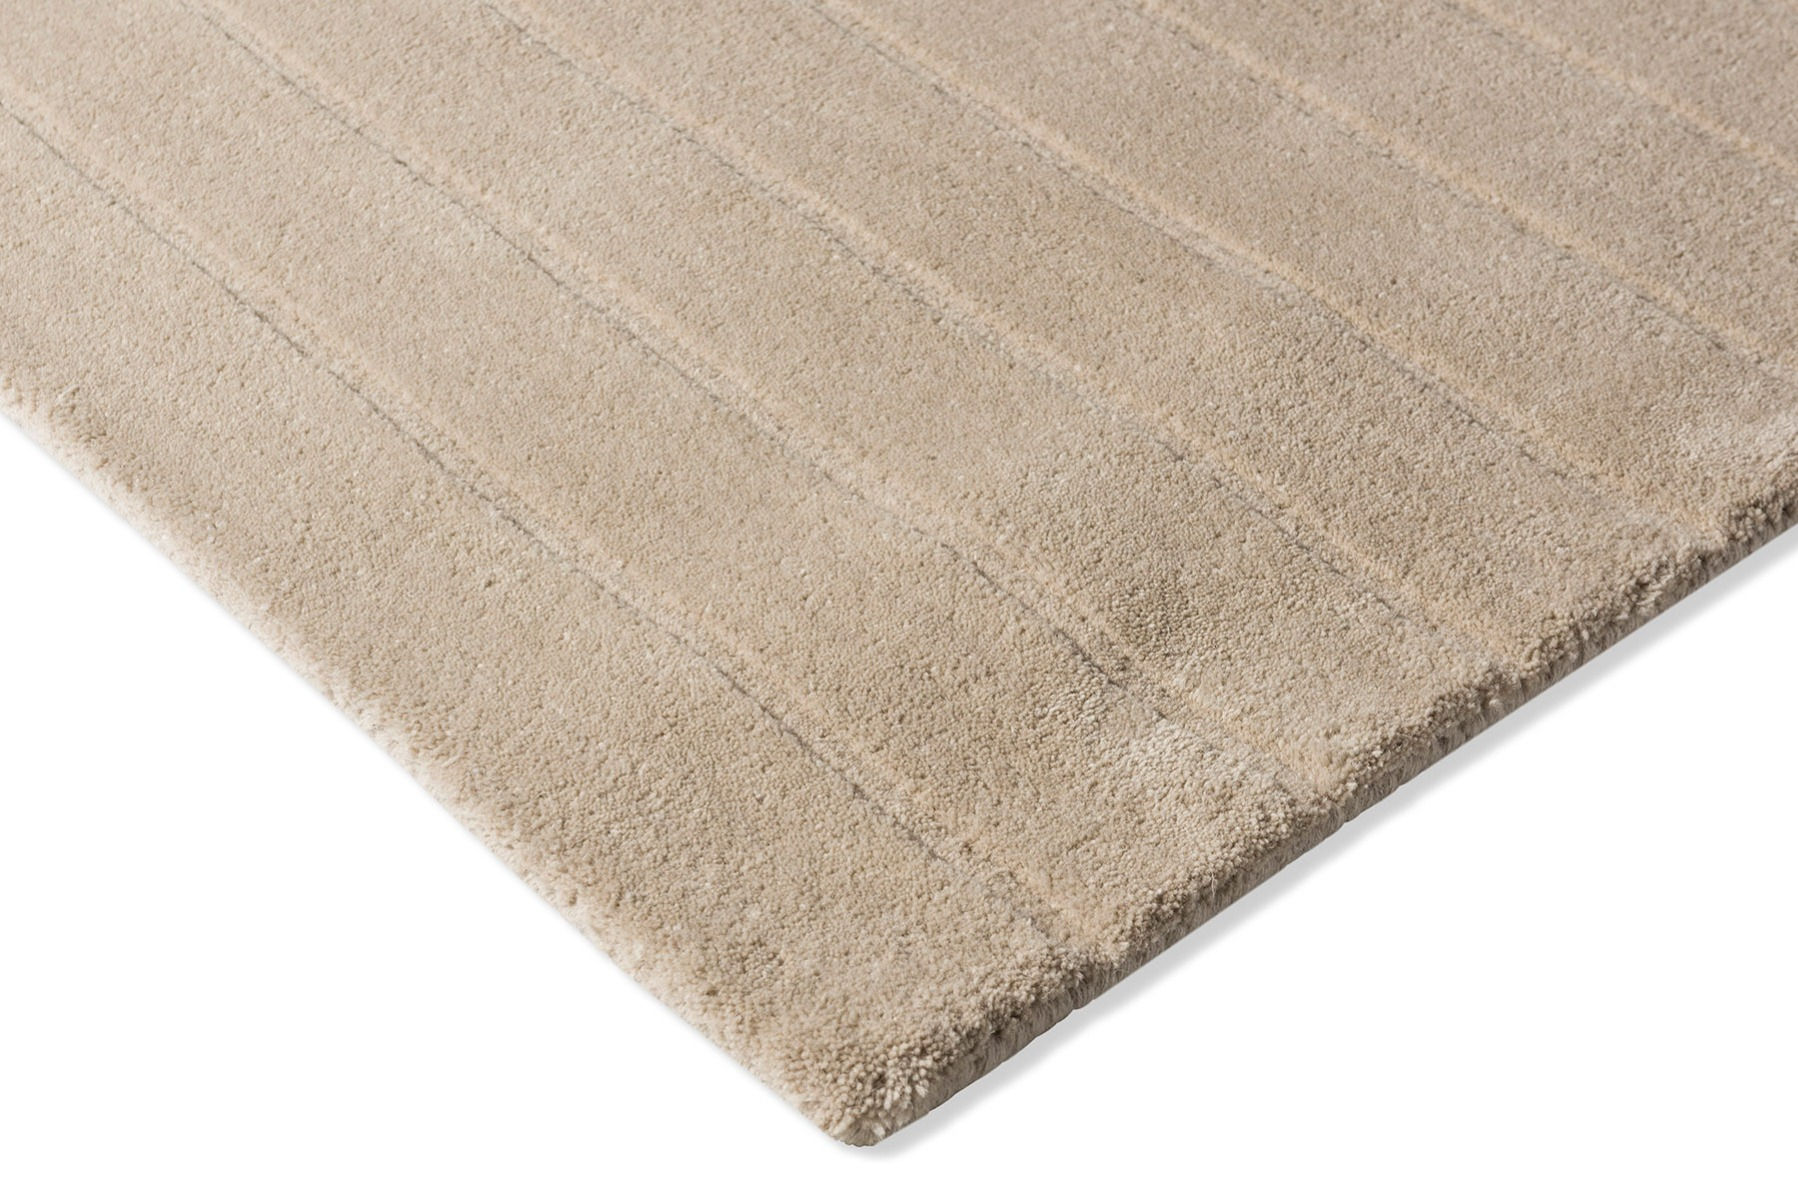 Decor Dune Oyster Handwoven Rug ☞ Size: 5' 3" x 7' 7" (160 x 230 cm)